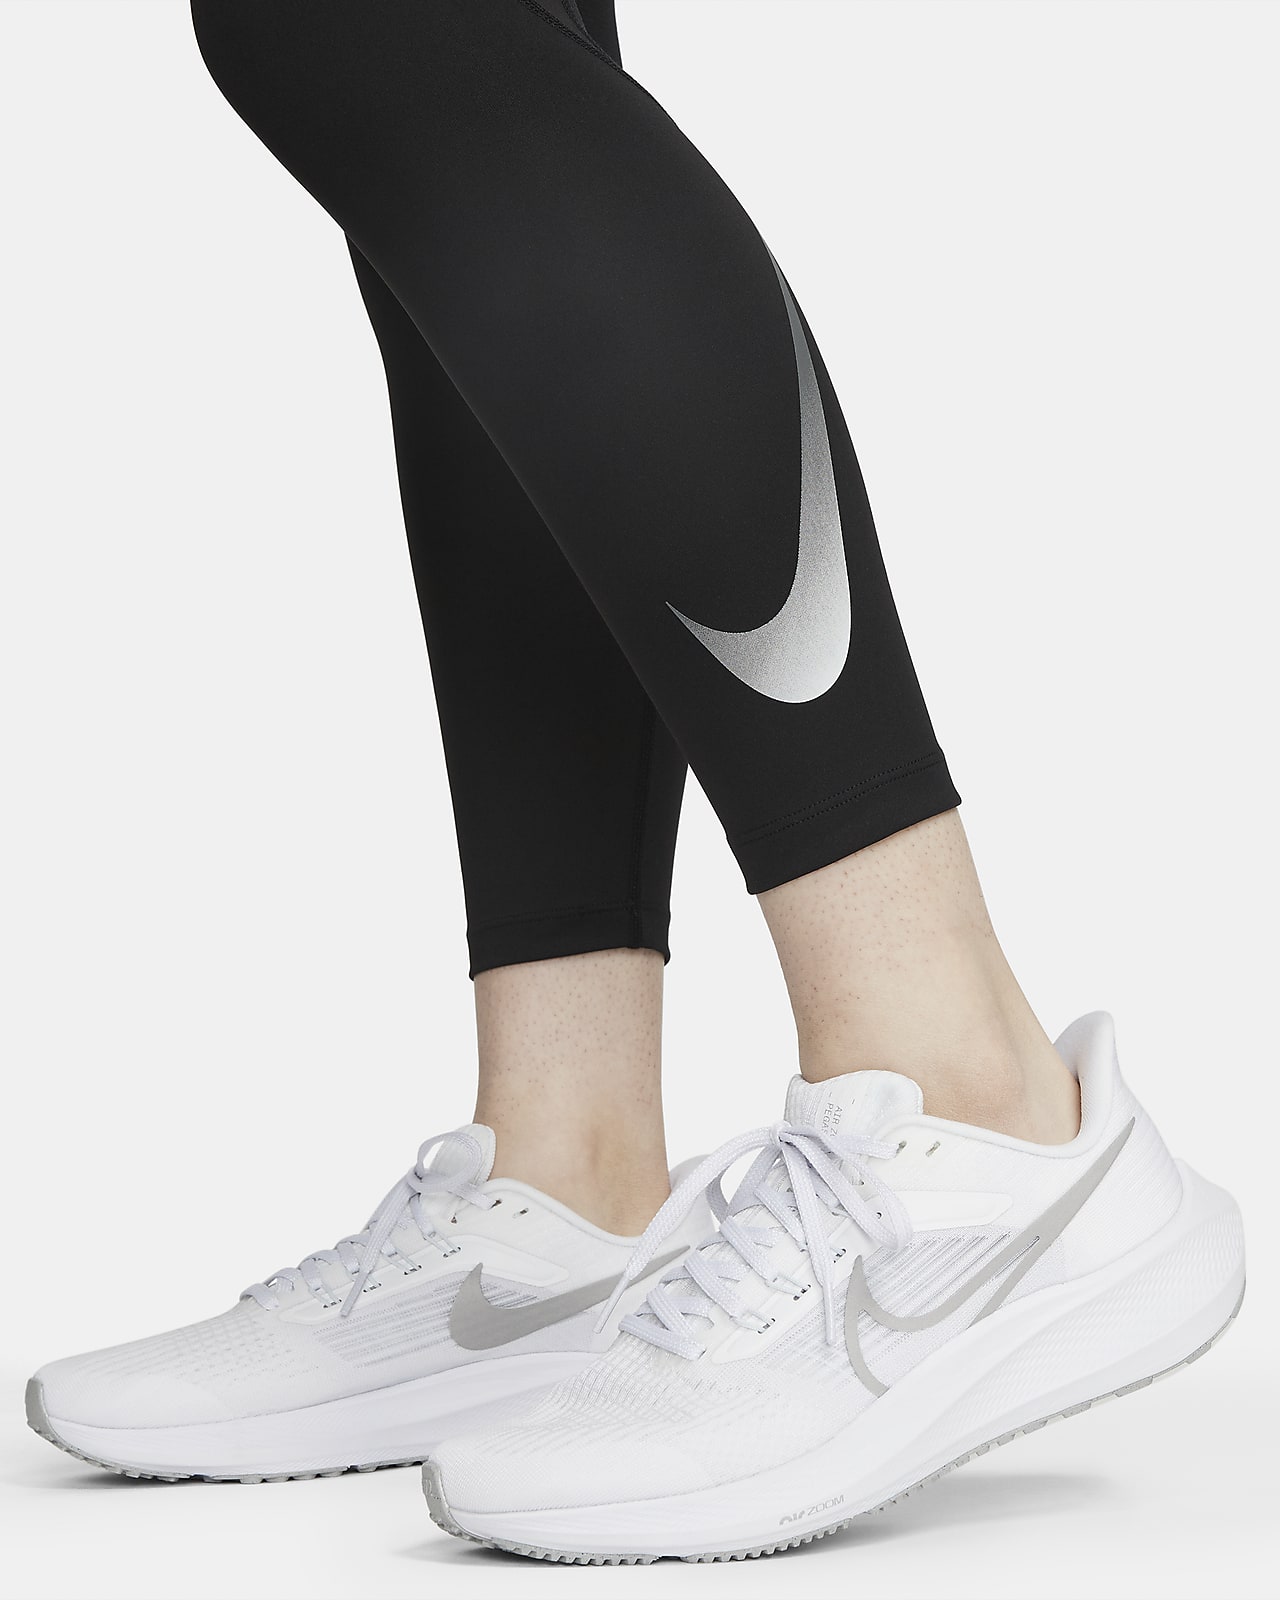 Mid-Rise with ID 7/8 Nike Nike Women\'s Leggings Pockets. Running Fast